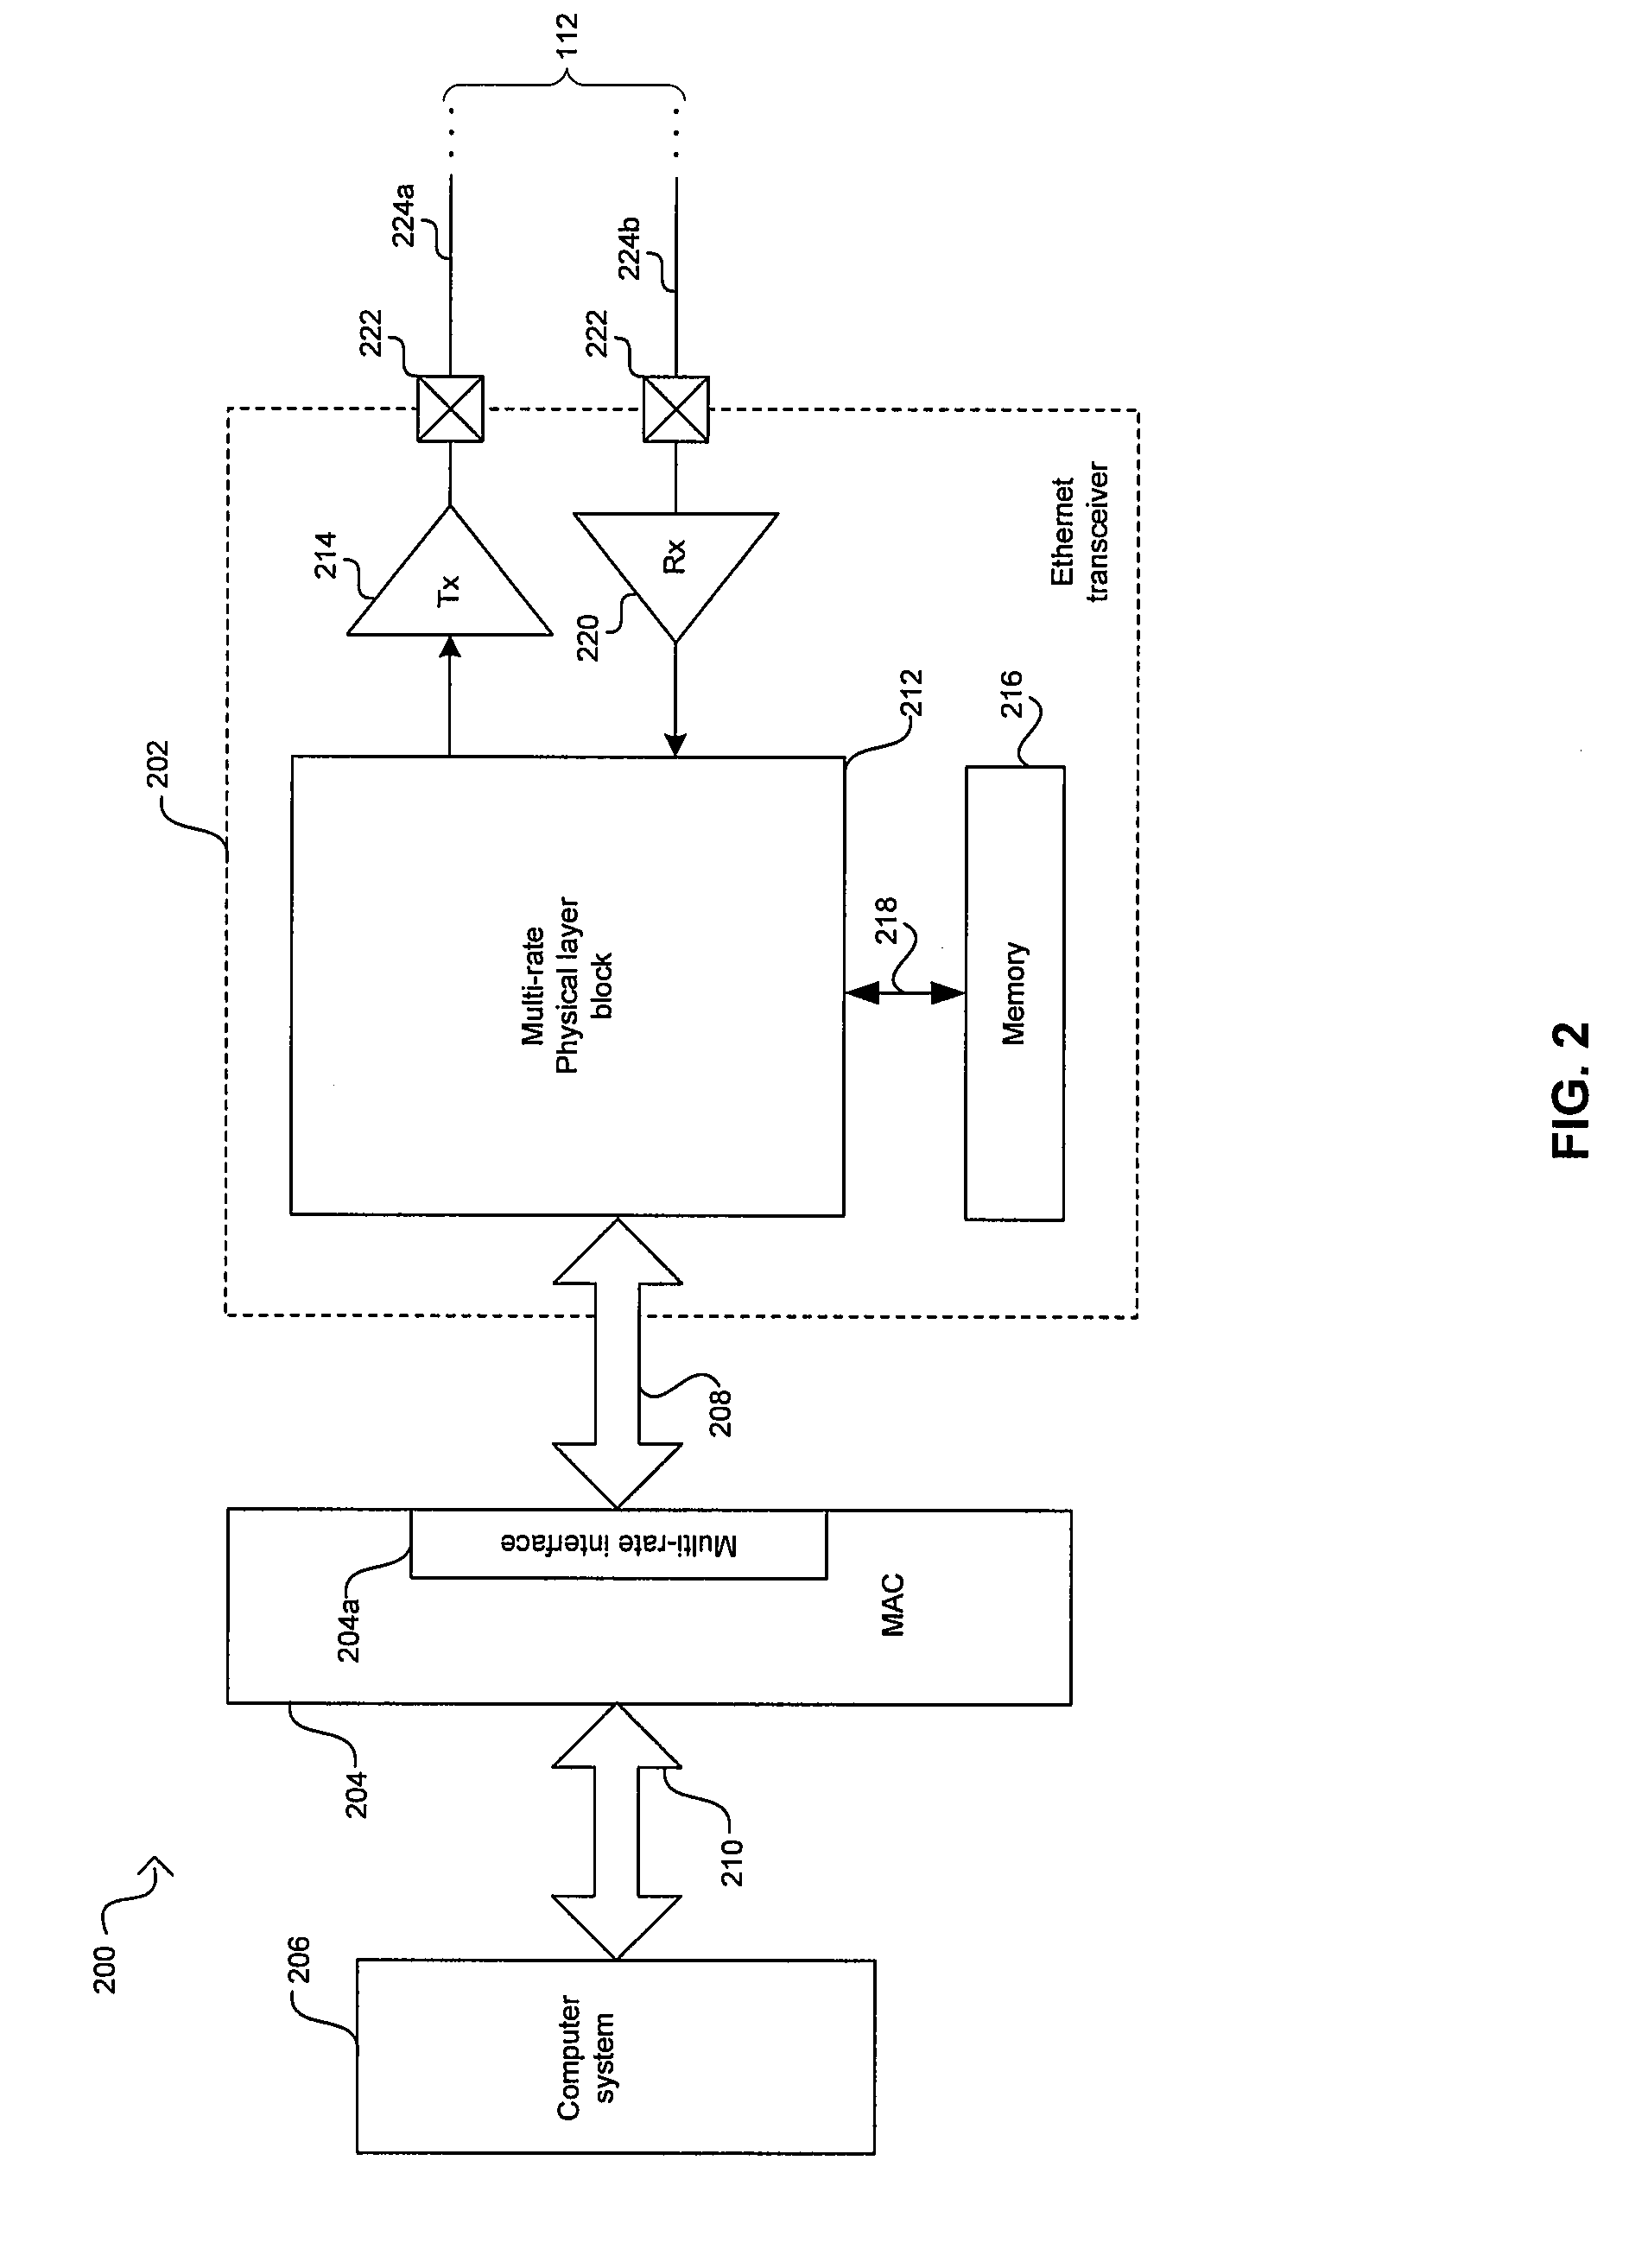 Method and system for low power idle signal transmission in ethernet networks